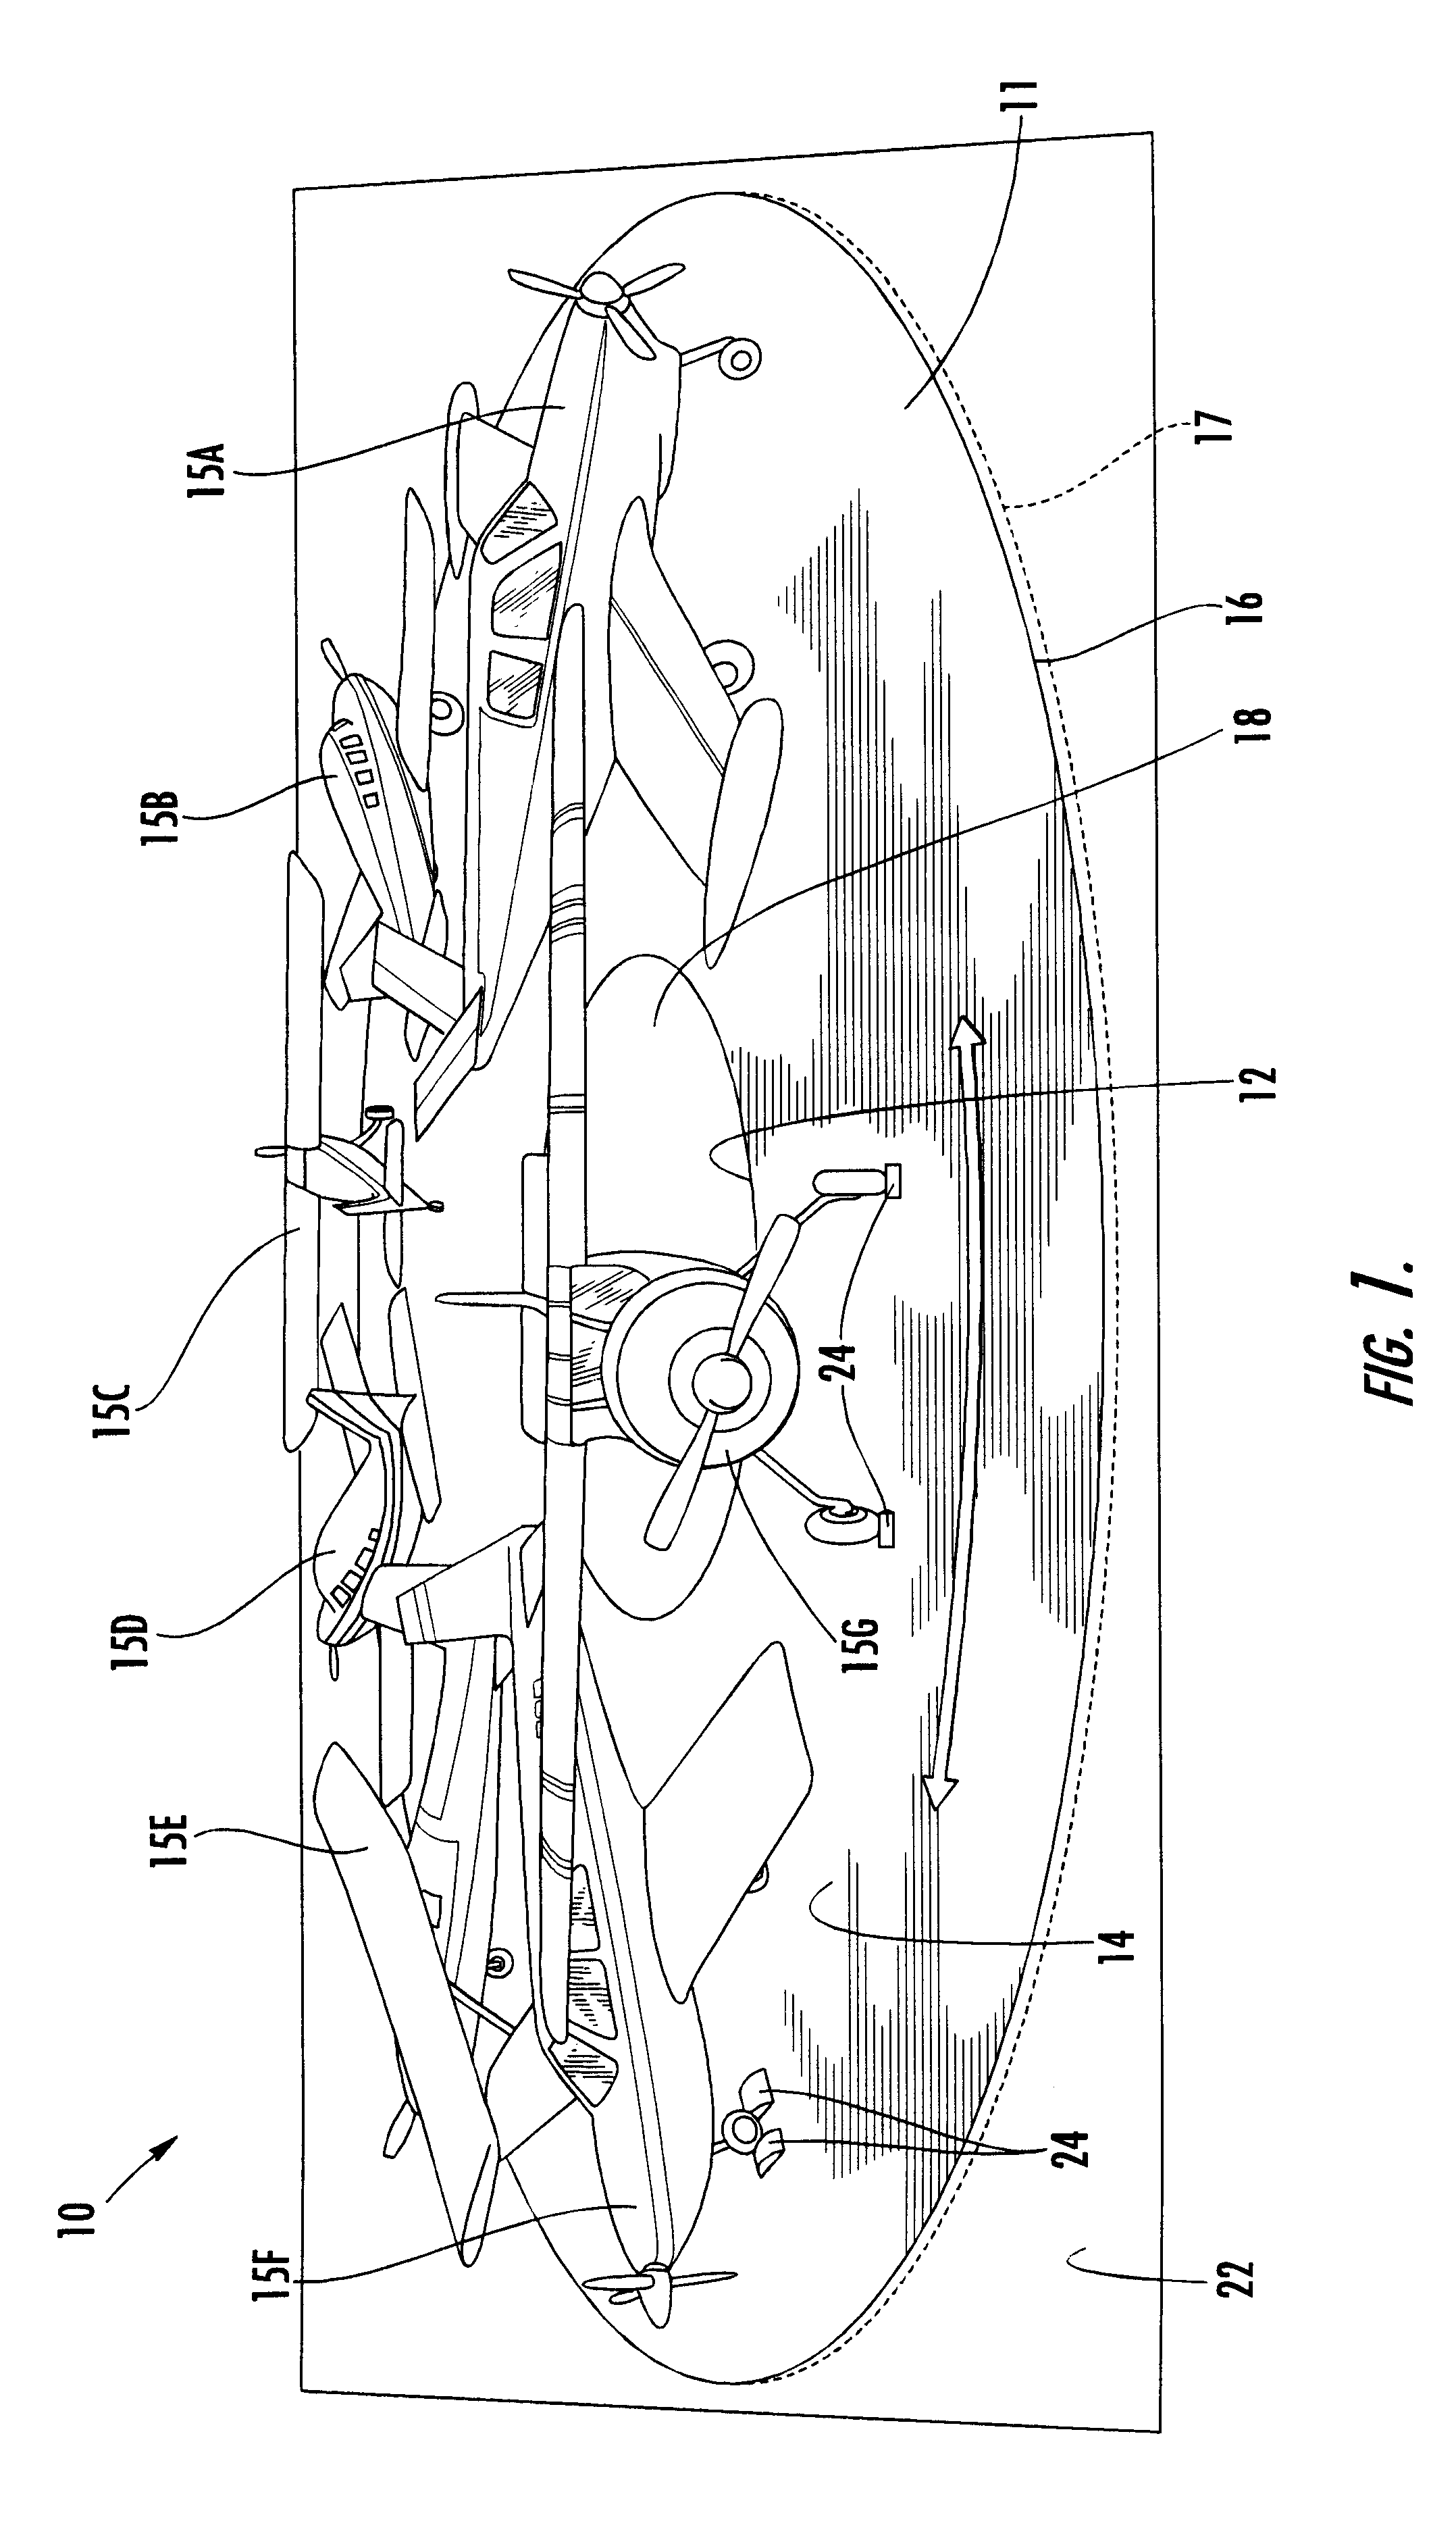 Aircraft storage turntable, hangar assembly and method